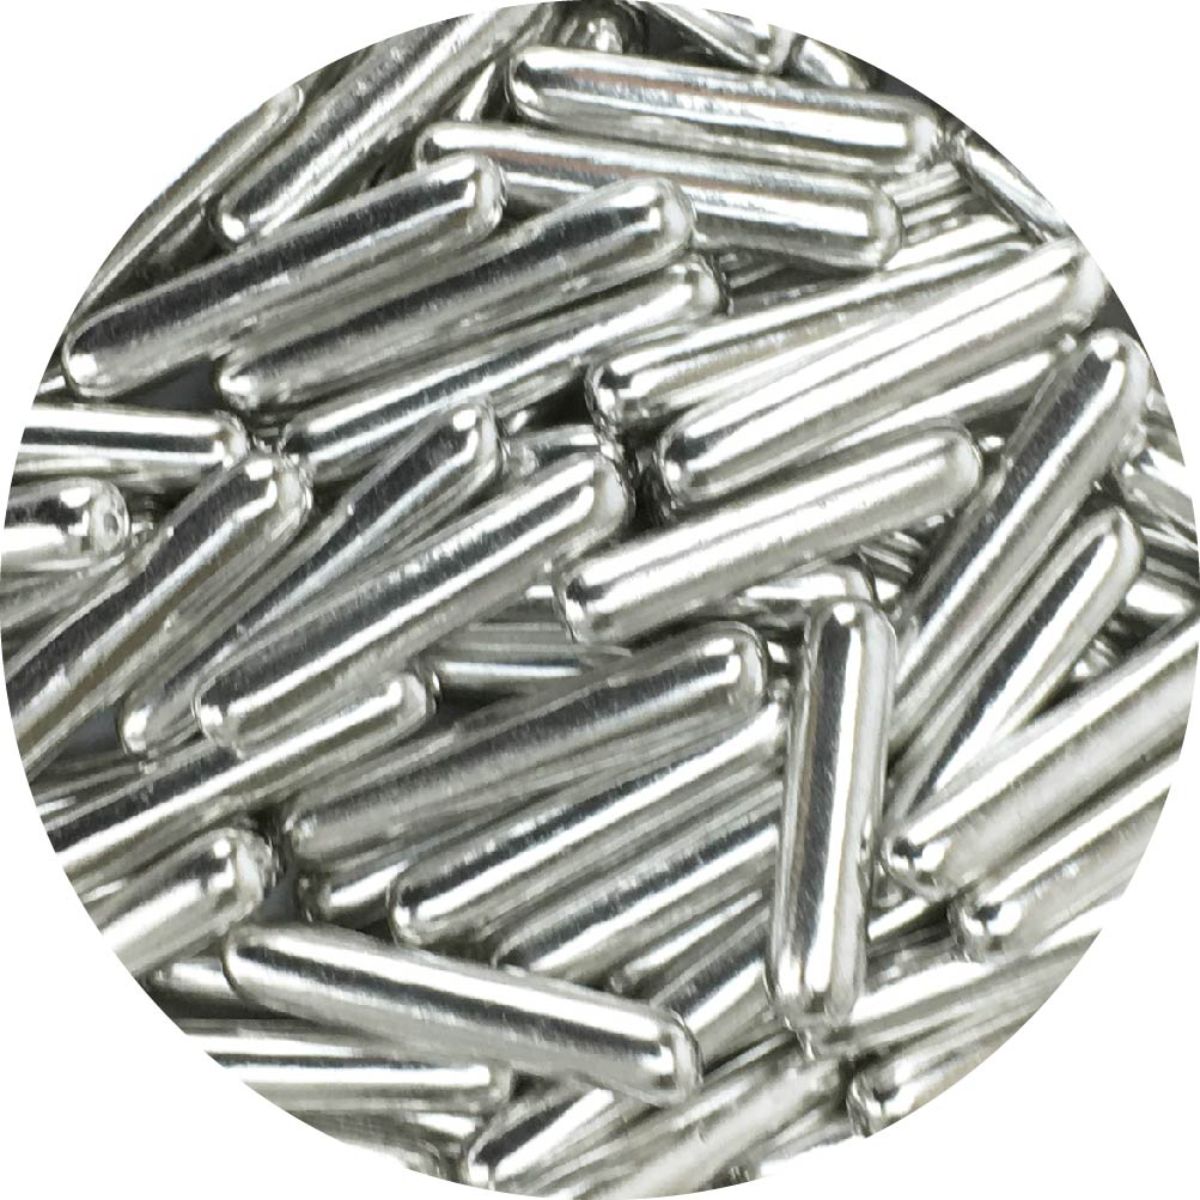 CK Dragees Silver Rods 3.3oz